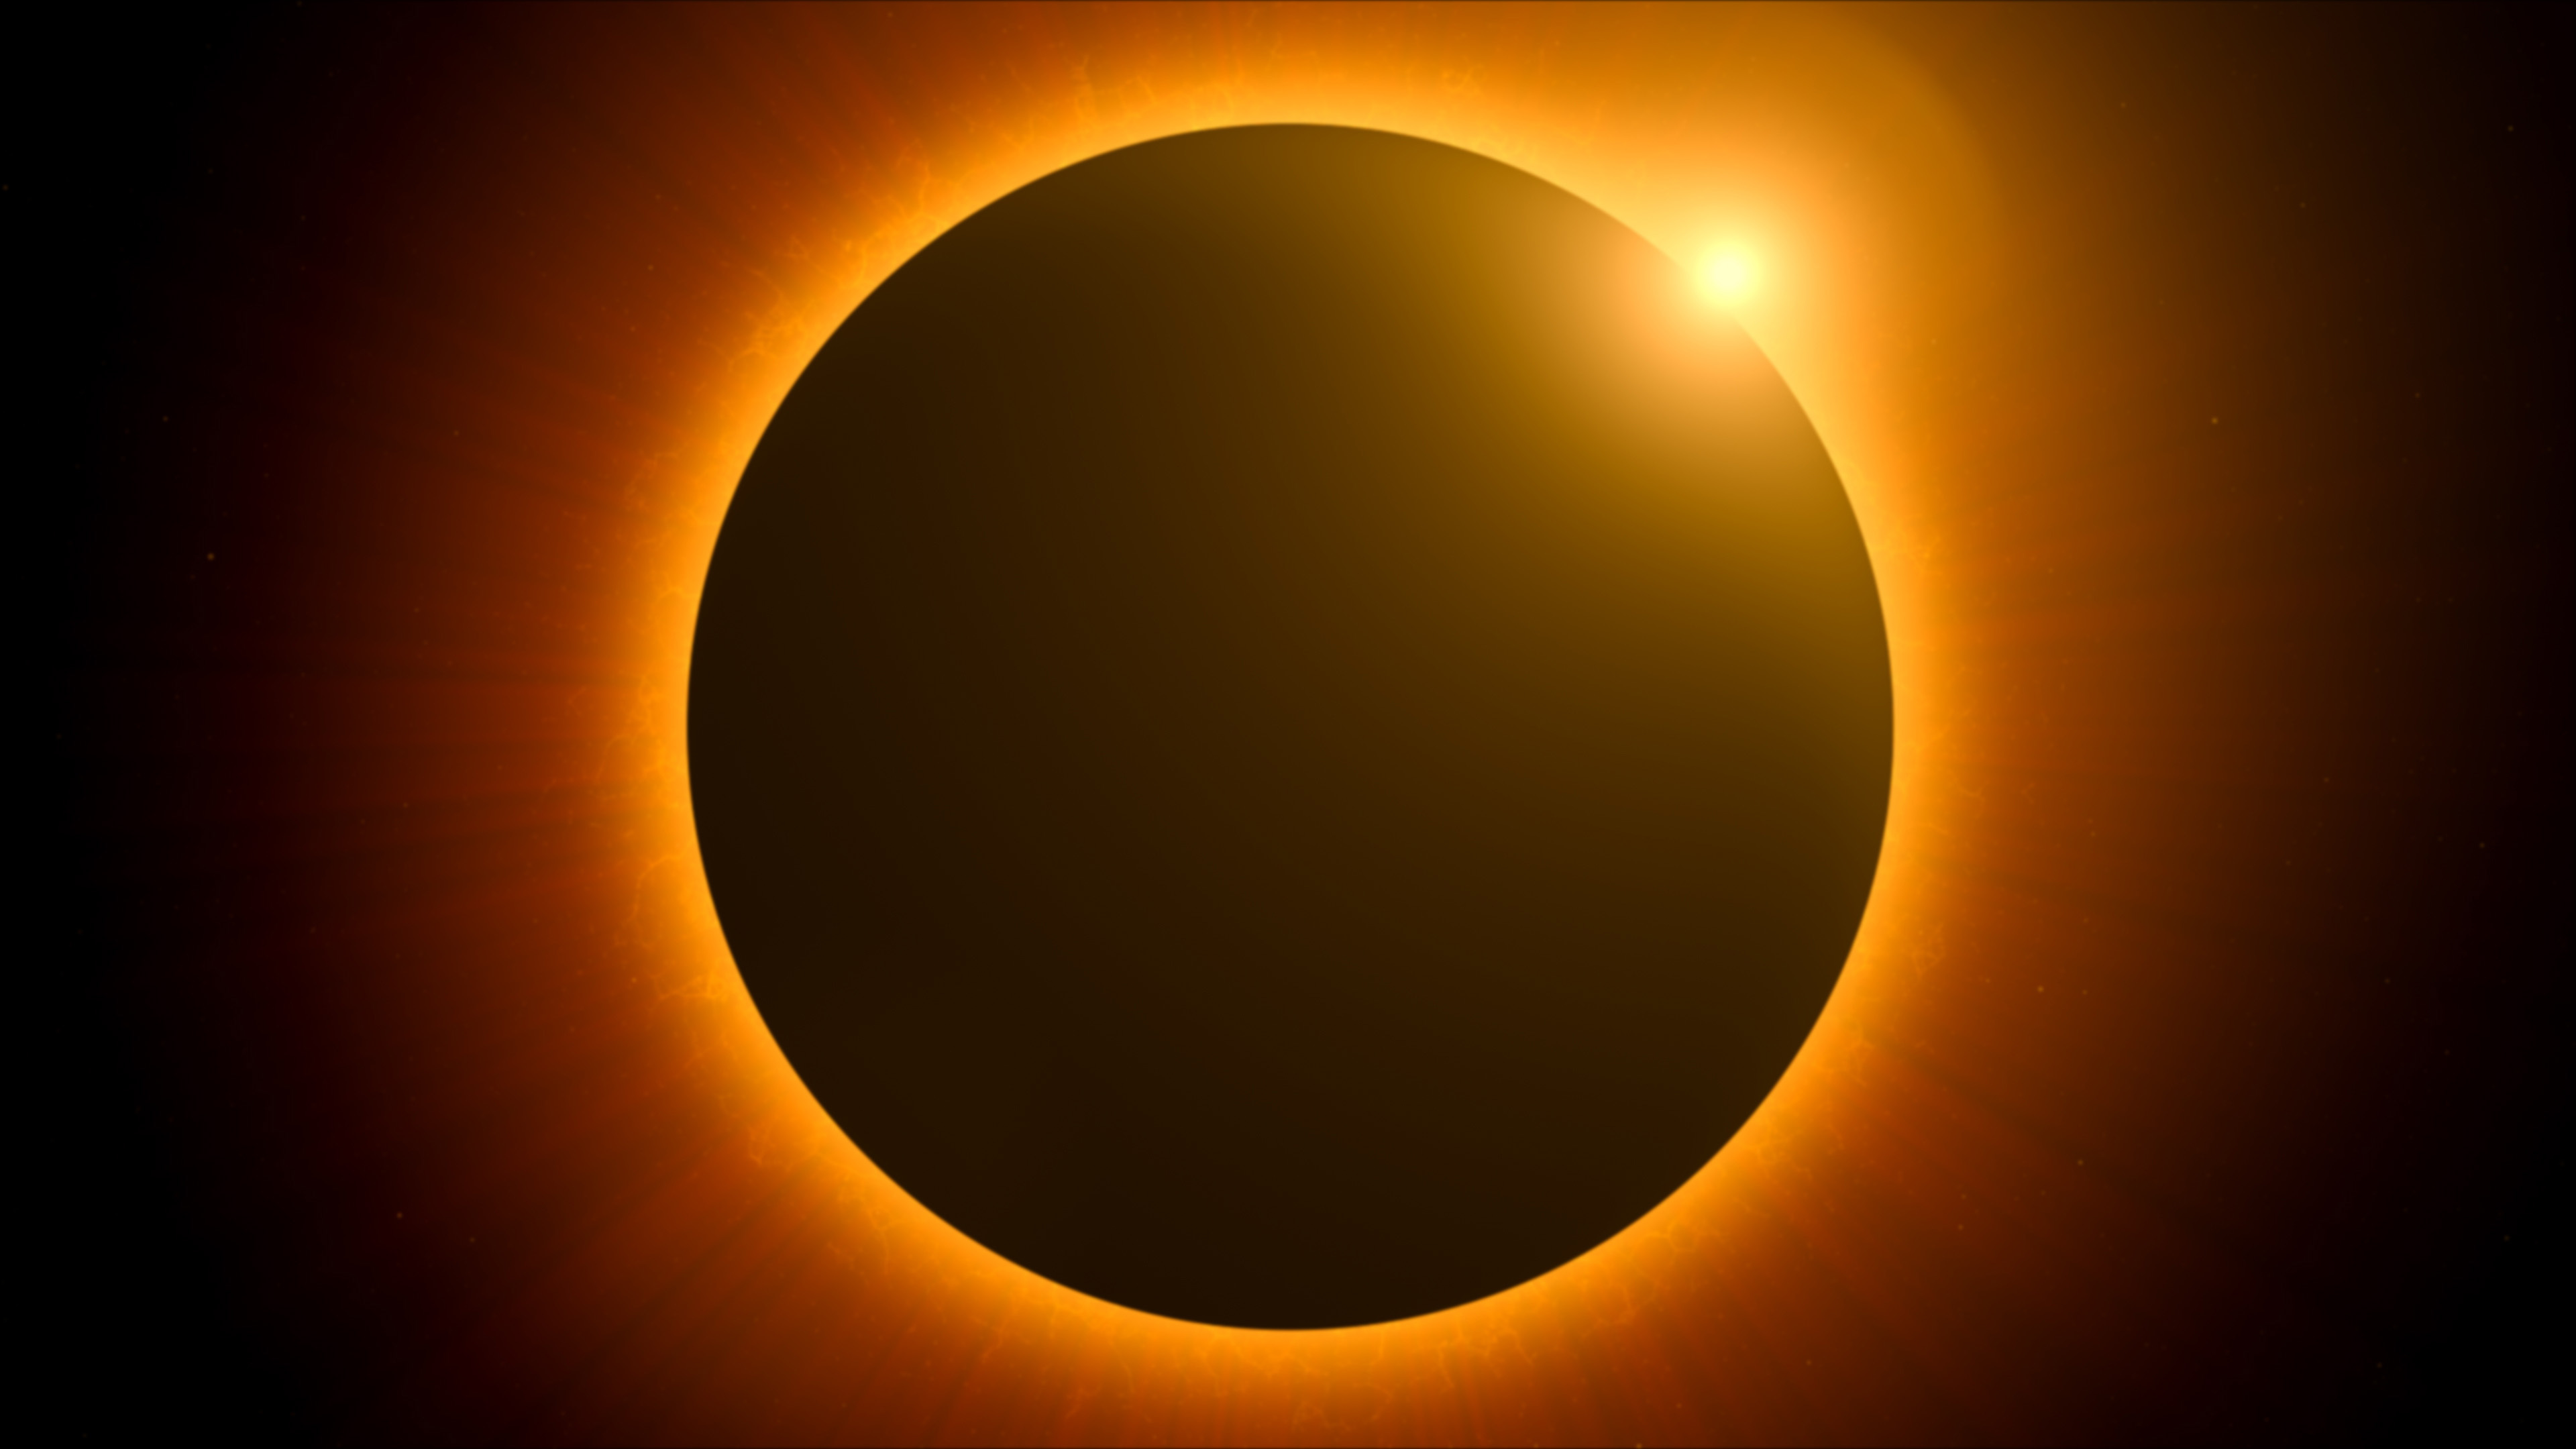 Eight Fast Facts for the Upcoming April 8 Great American Eclipse